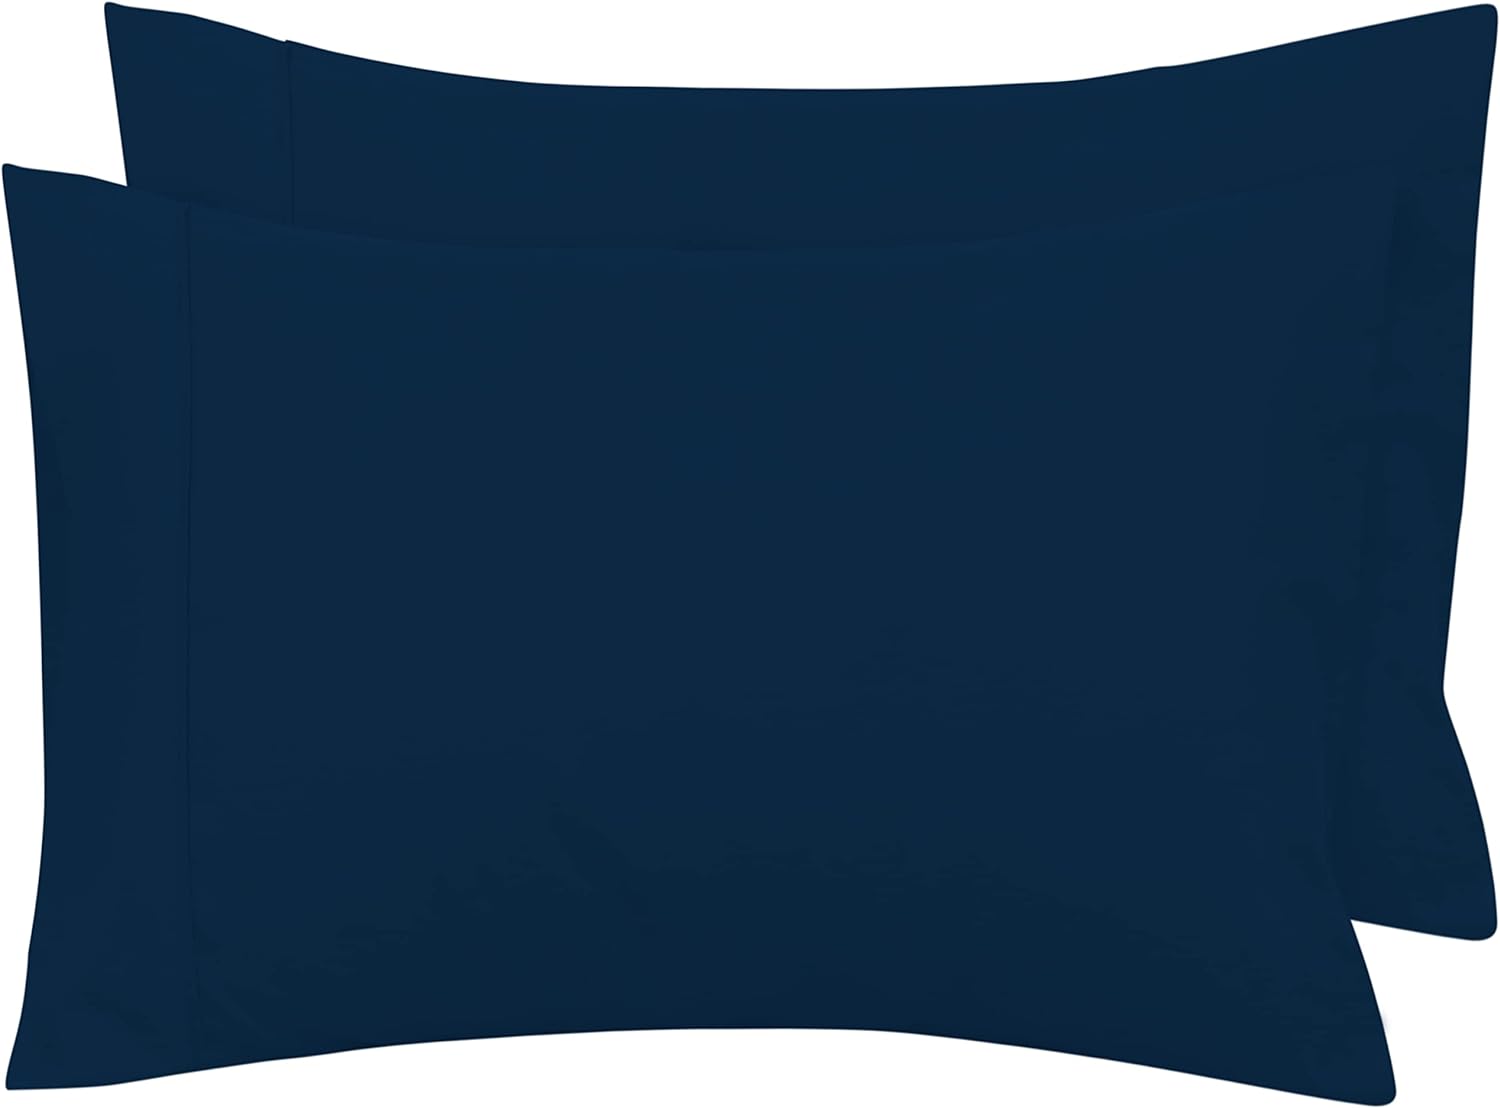 Royale Linens Queen Pillowcase Set of 2 - Bed Pillow Cover - 20" x 30" - Navy Pillowcases - 1800 Brushed Microfiber, Wrinkle & Fade Resistant - Soft & Cozy- Queen Size Pillow Case (Queen, Navy)